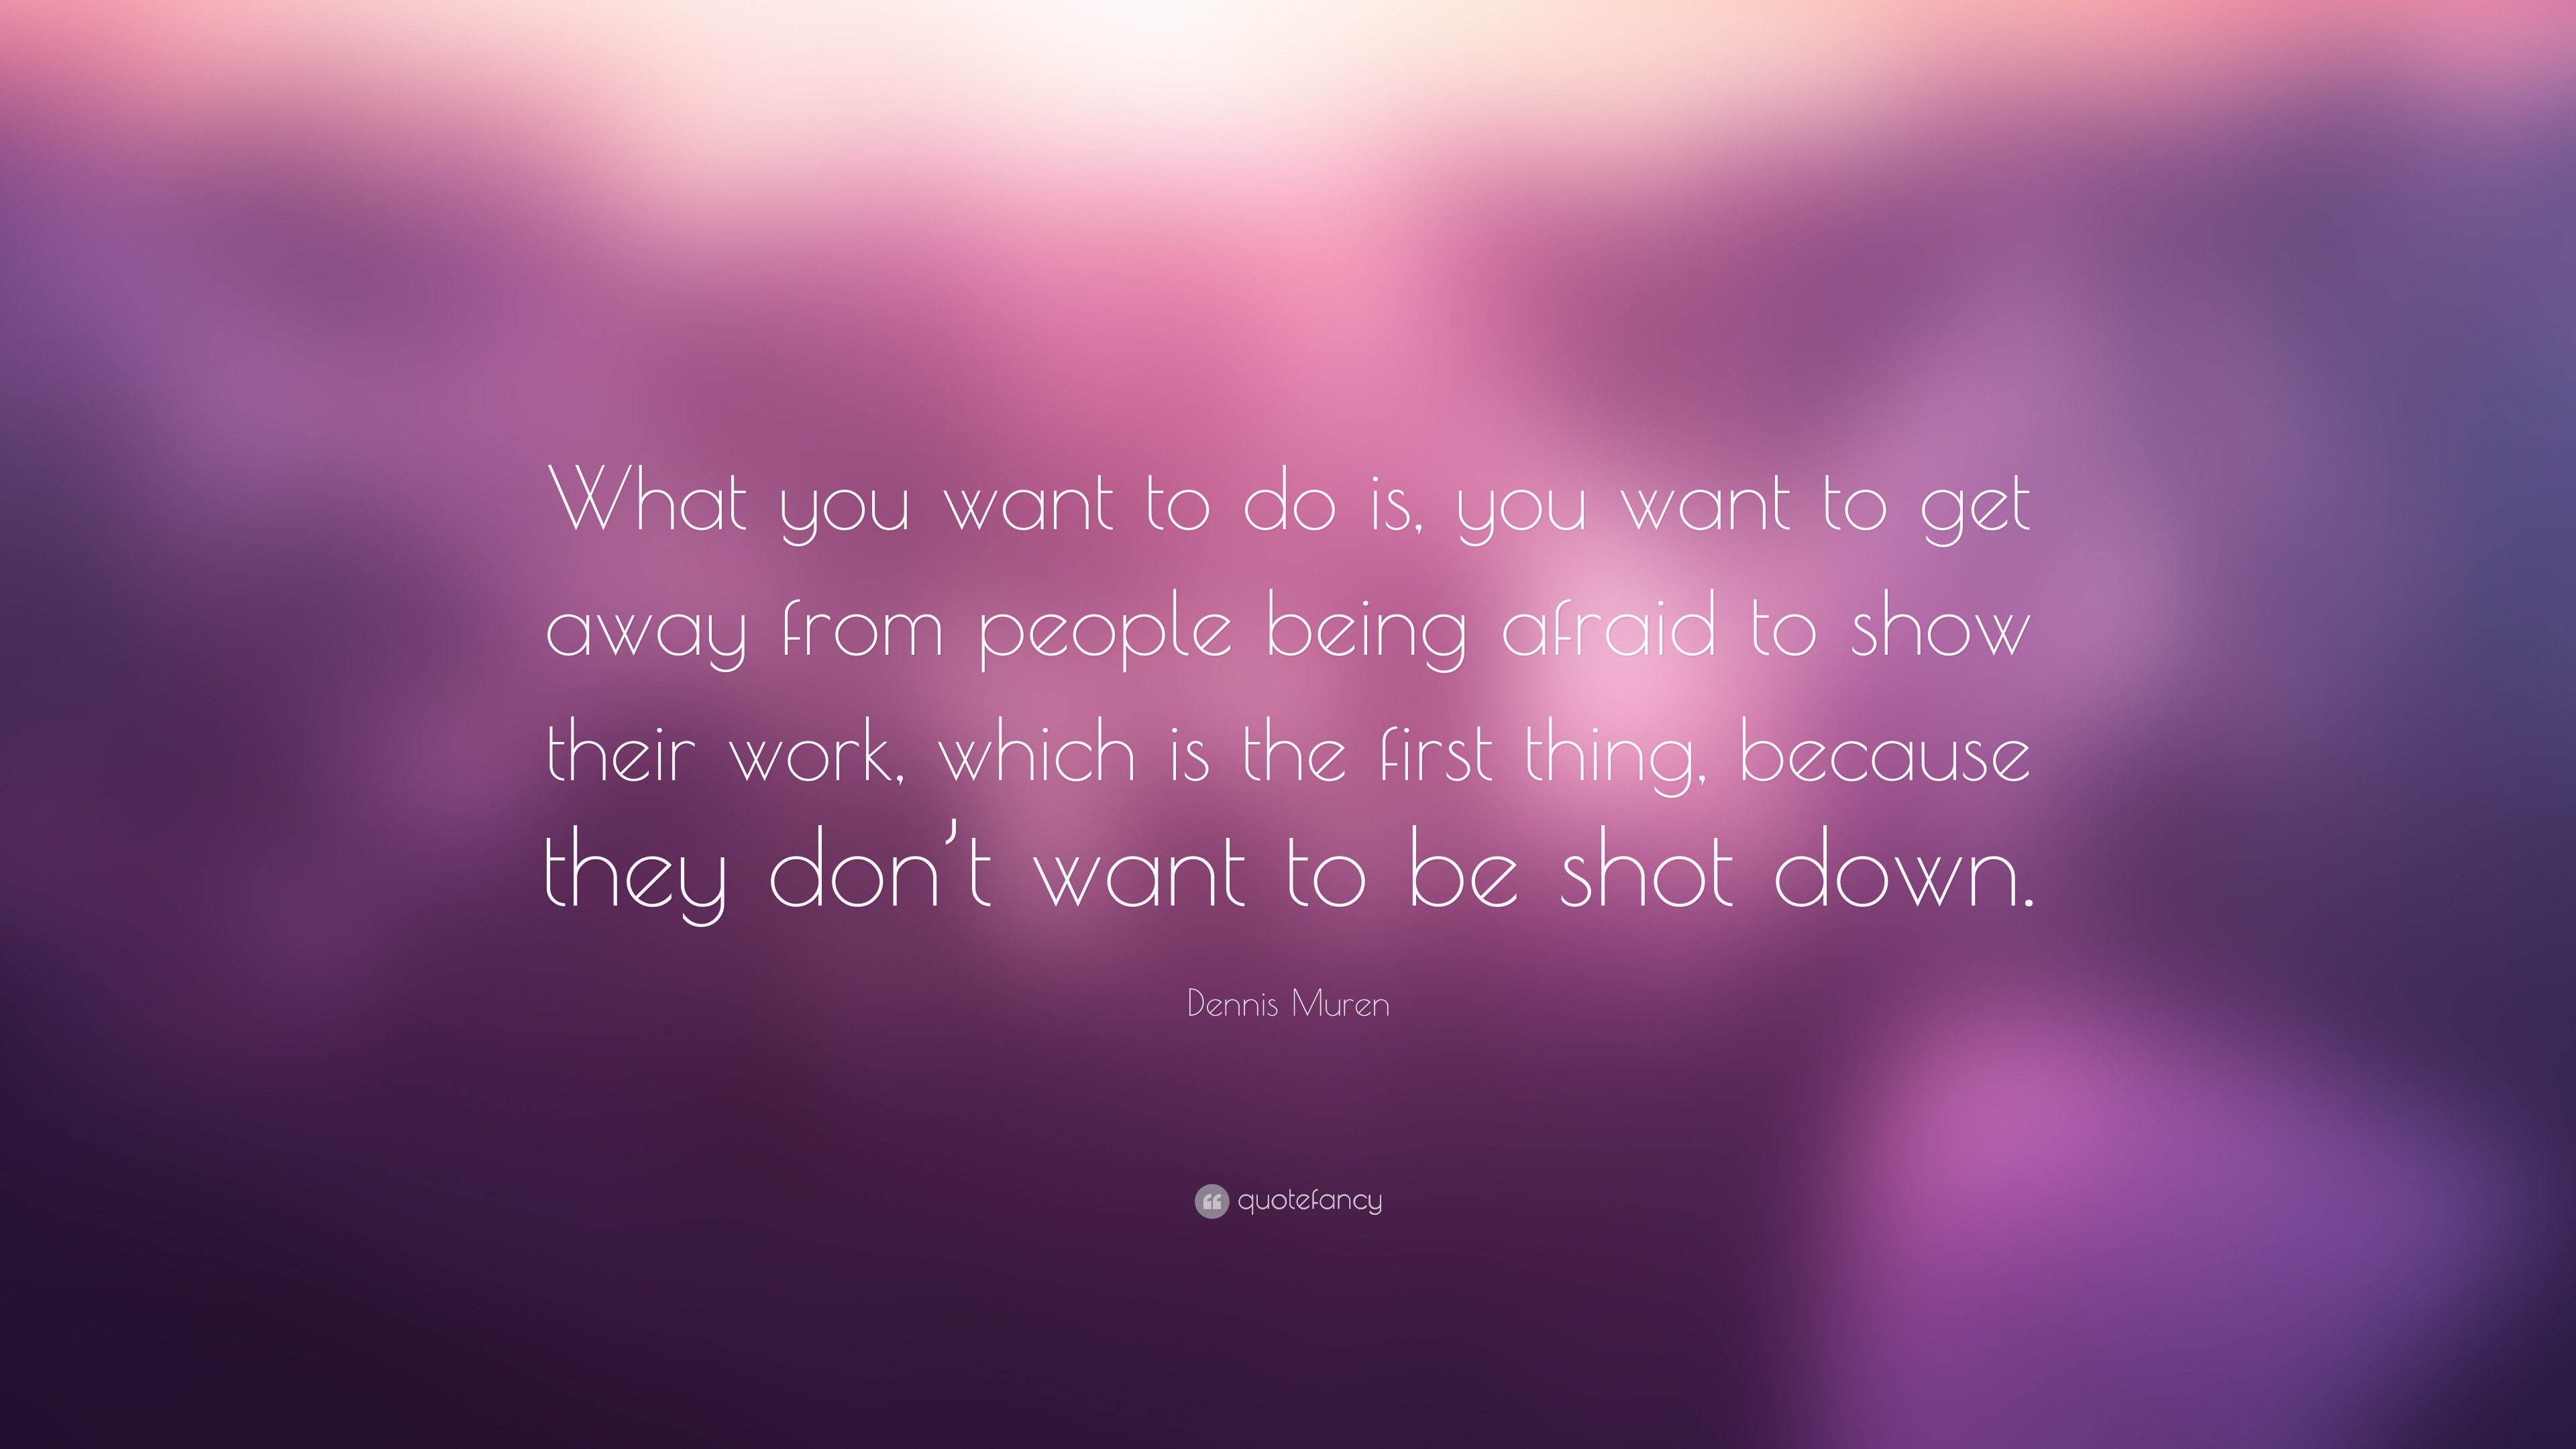 Dennis Muren Quote: “What you want to do is, you want to get away from ...